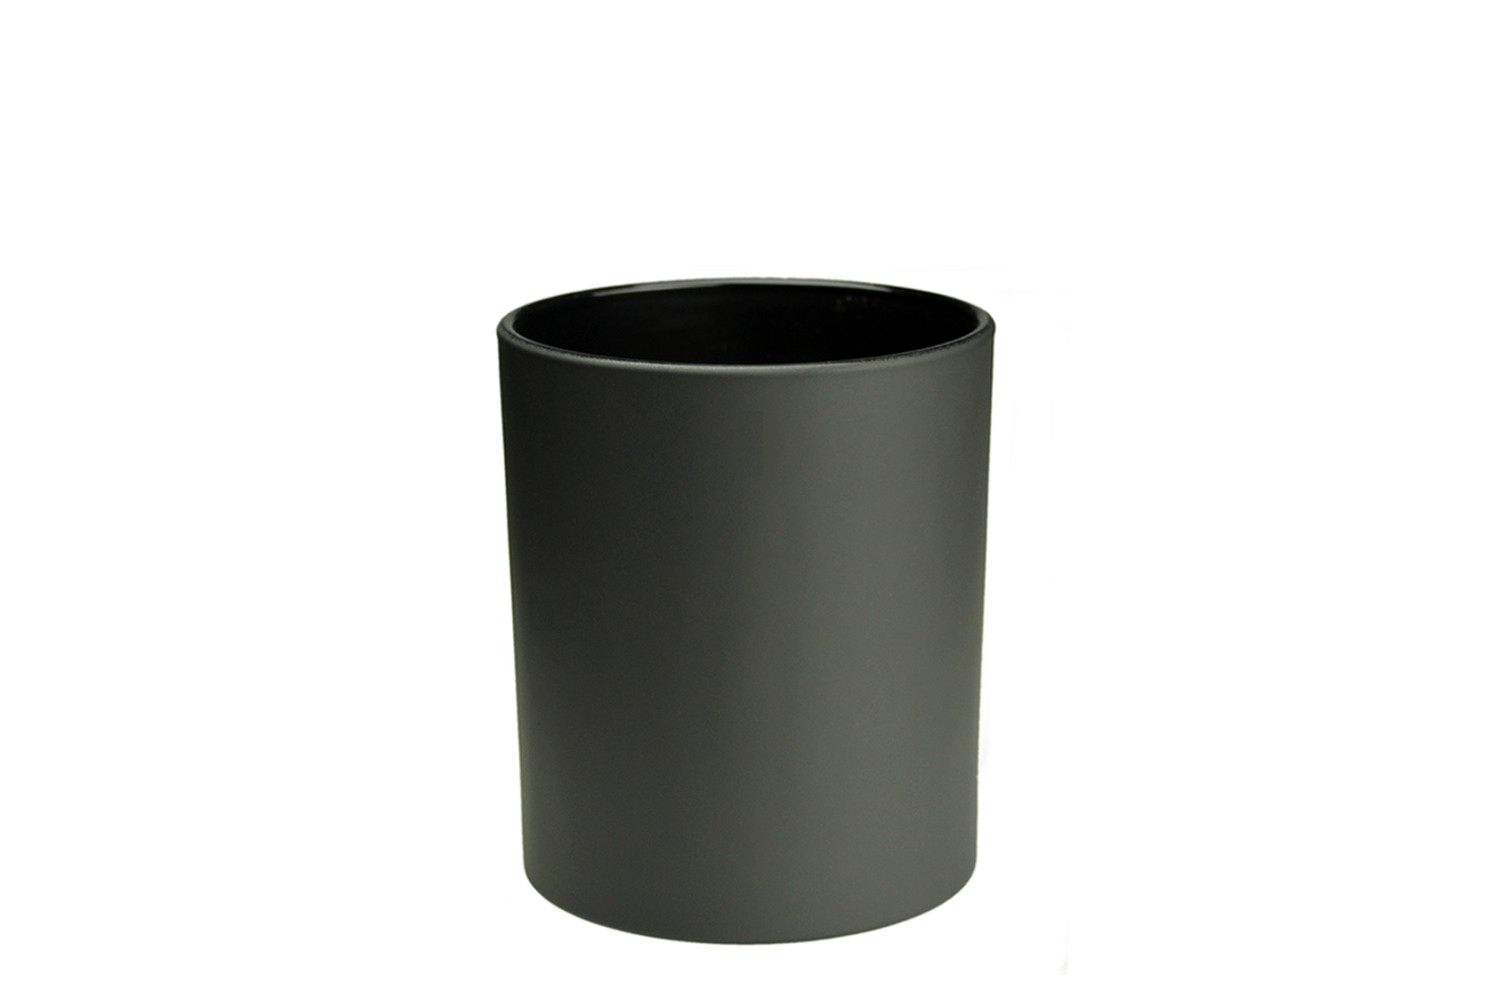 6X 9cl Externally Black Matt Black Candle Glass for Candle Making